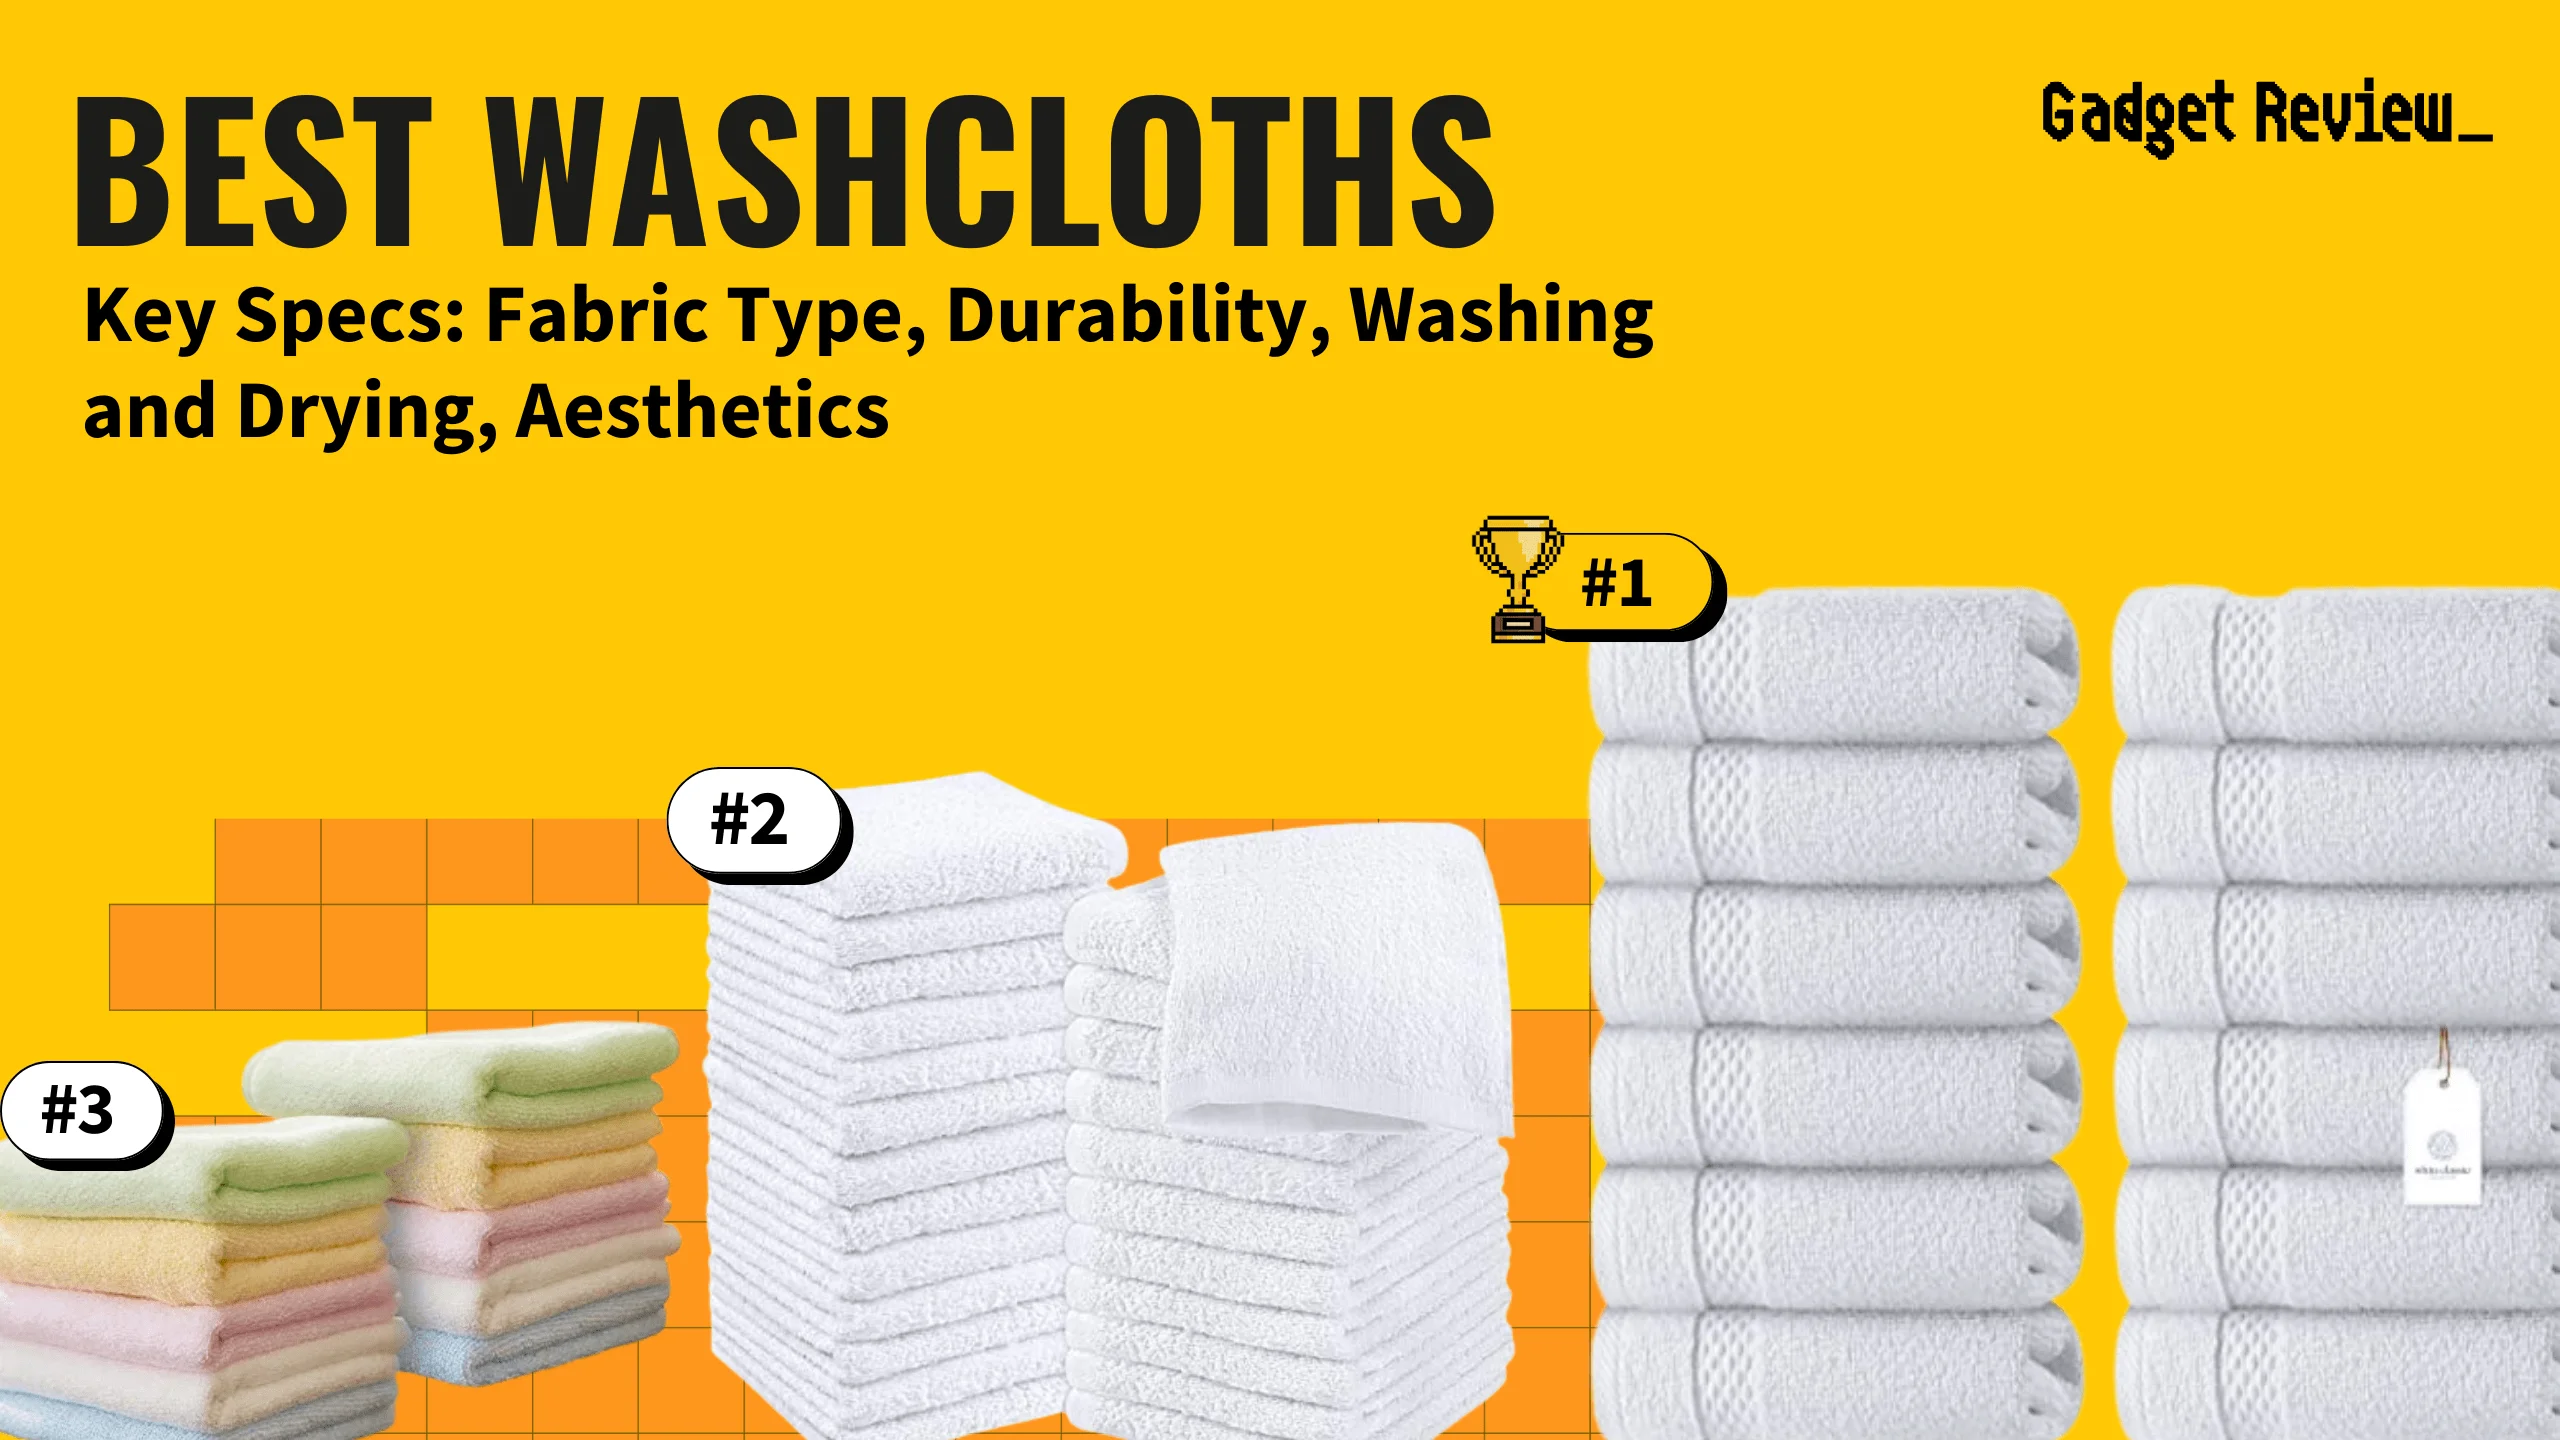 best washcloth featured image that shows the top three best bathroom essential models